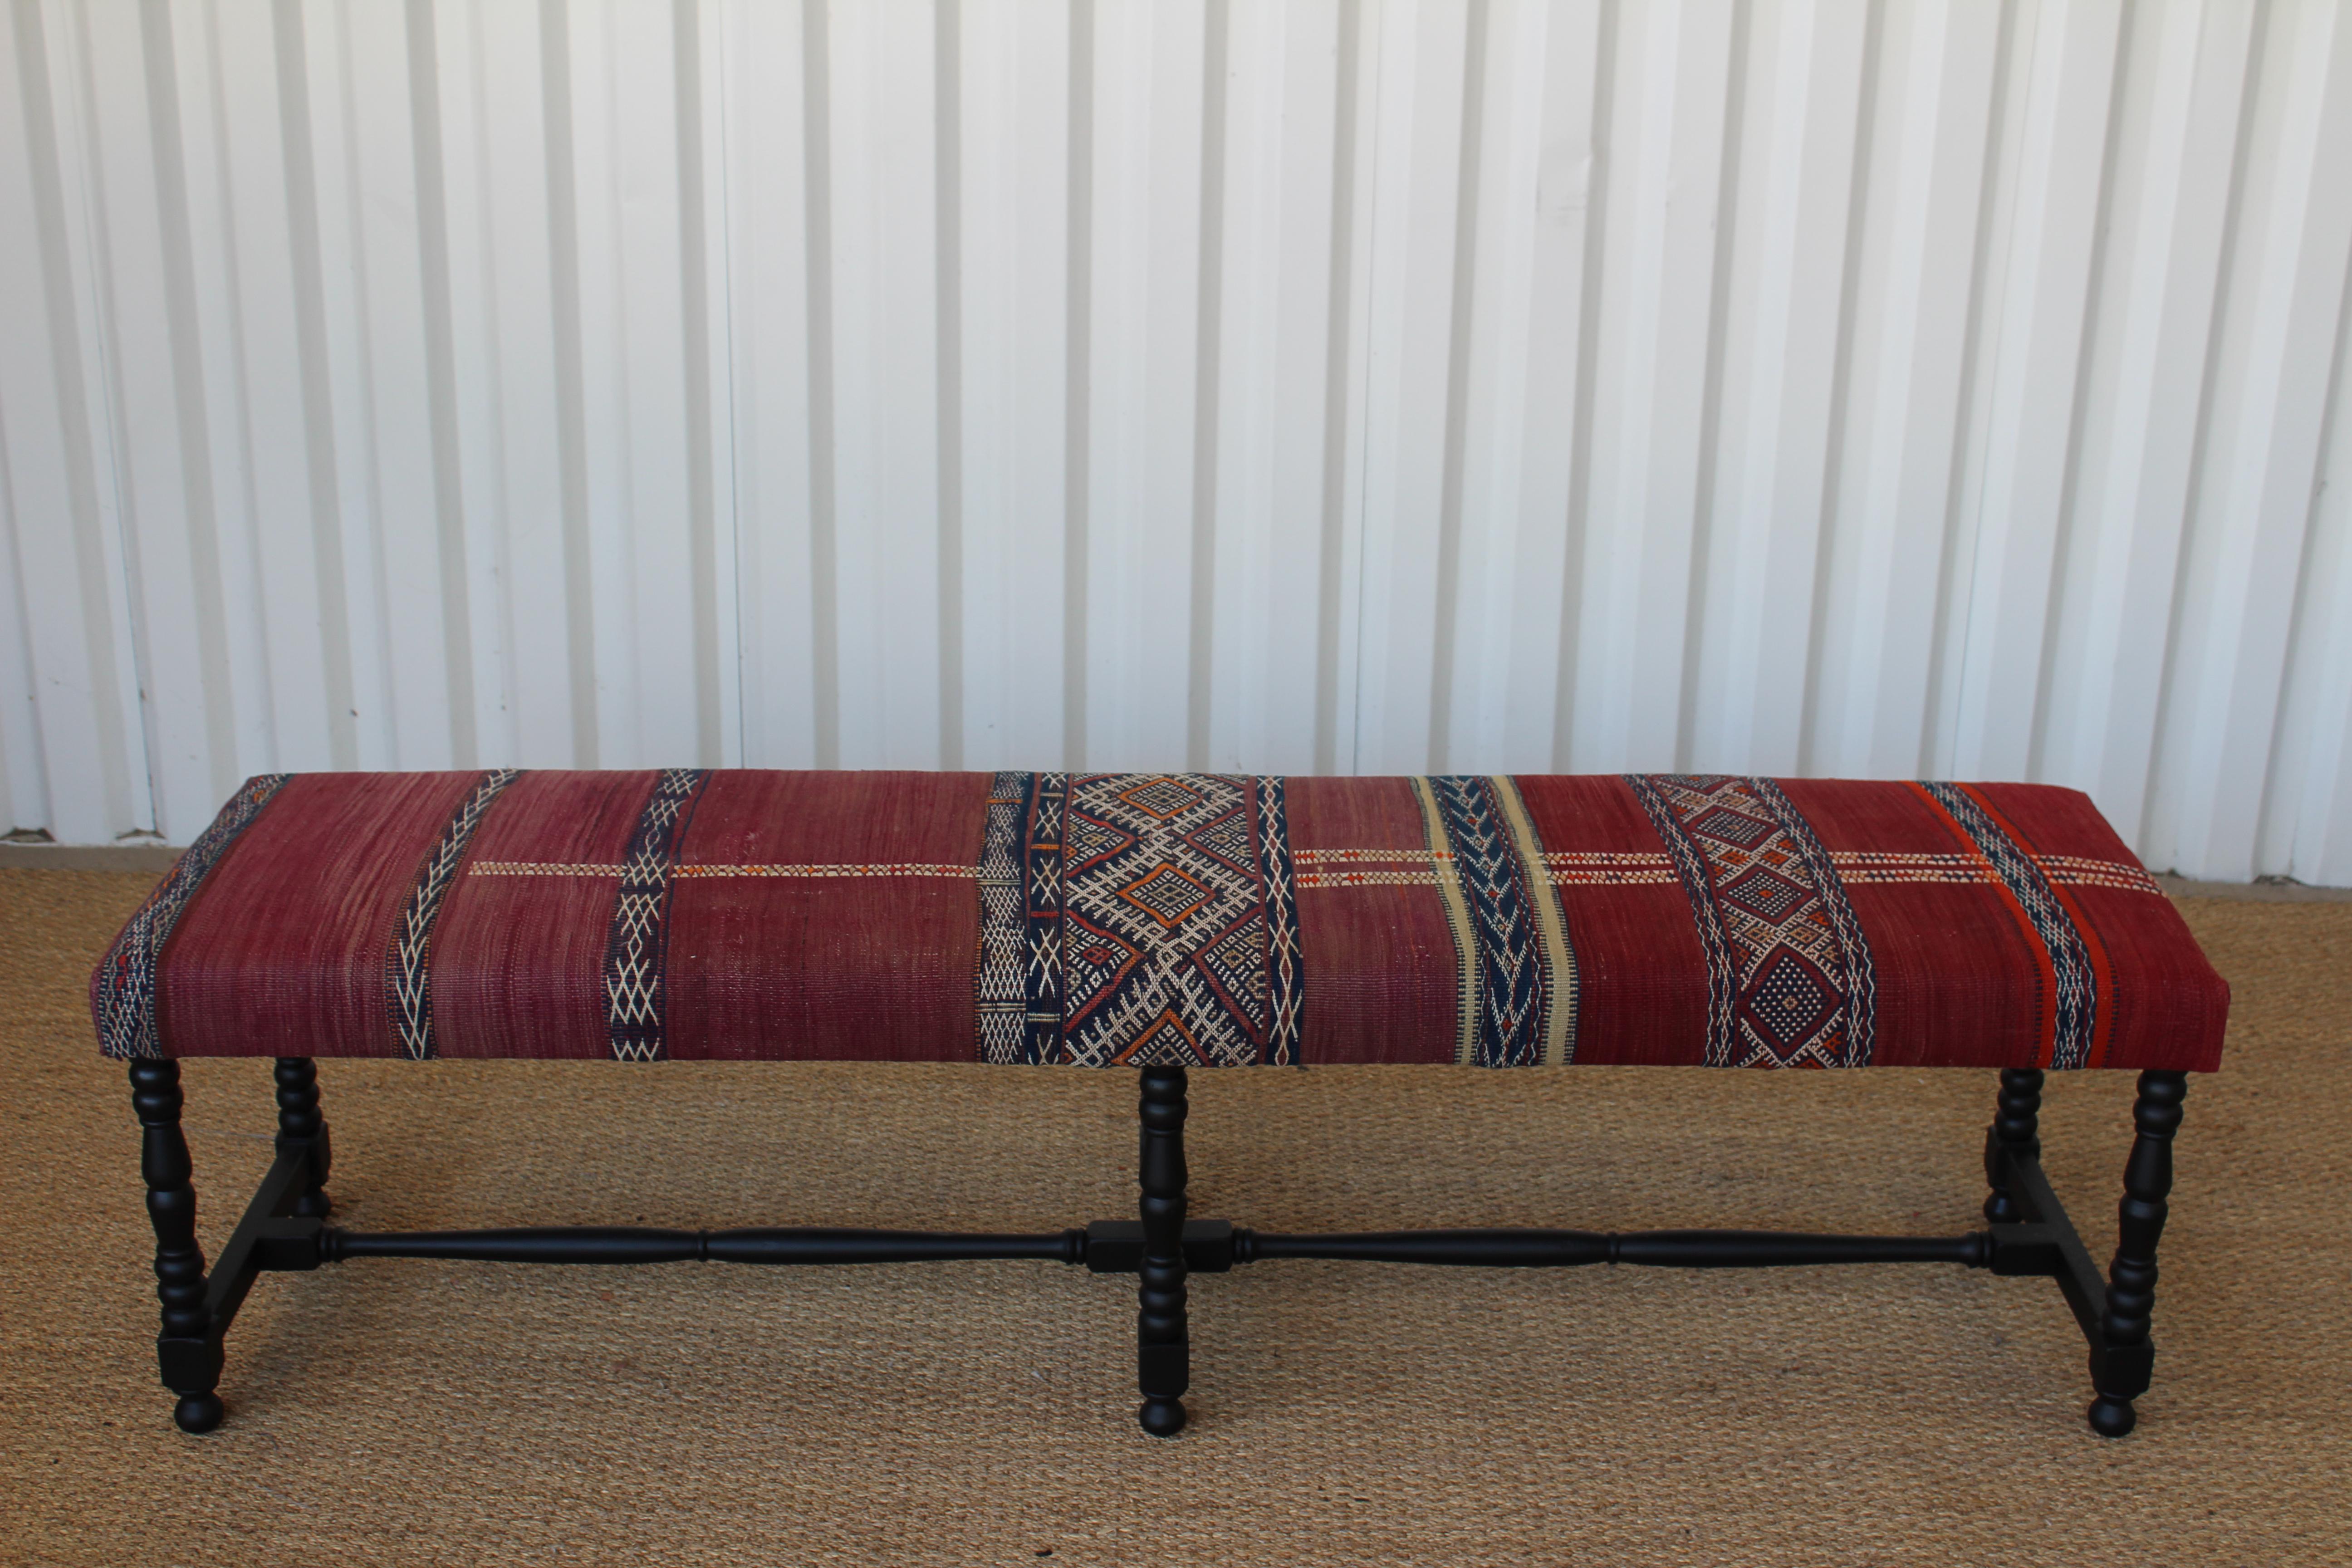 Vintage bench newly upholstered in a vintage flat-weave Kilim rug from Turkey. In excellent condition with new satin black finish on the walnut frame.